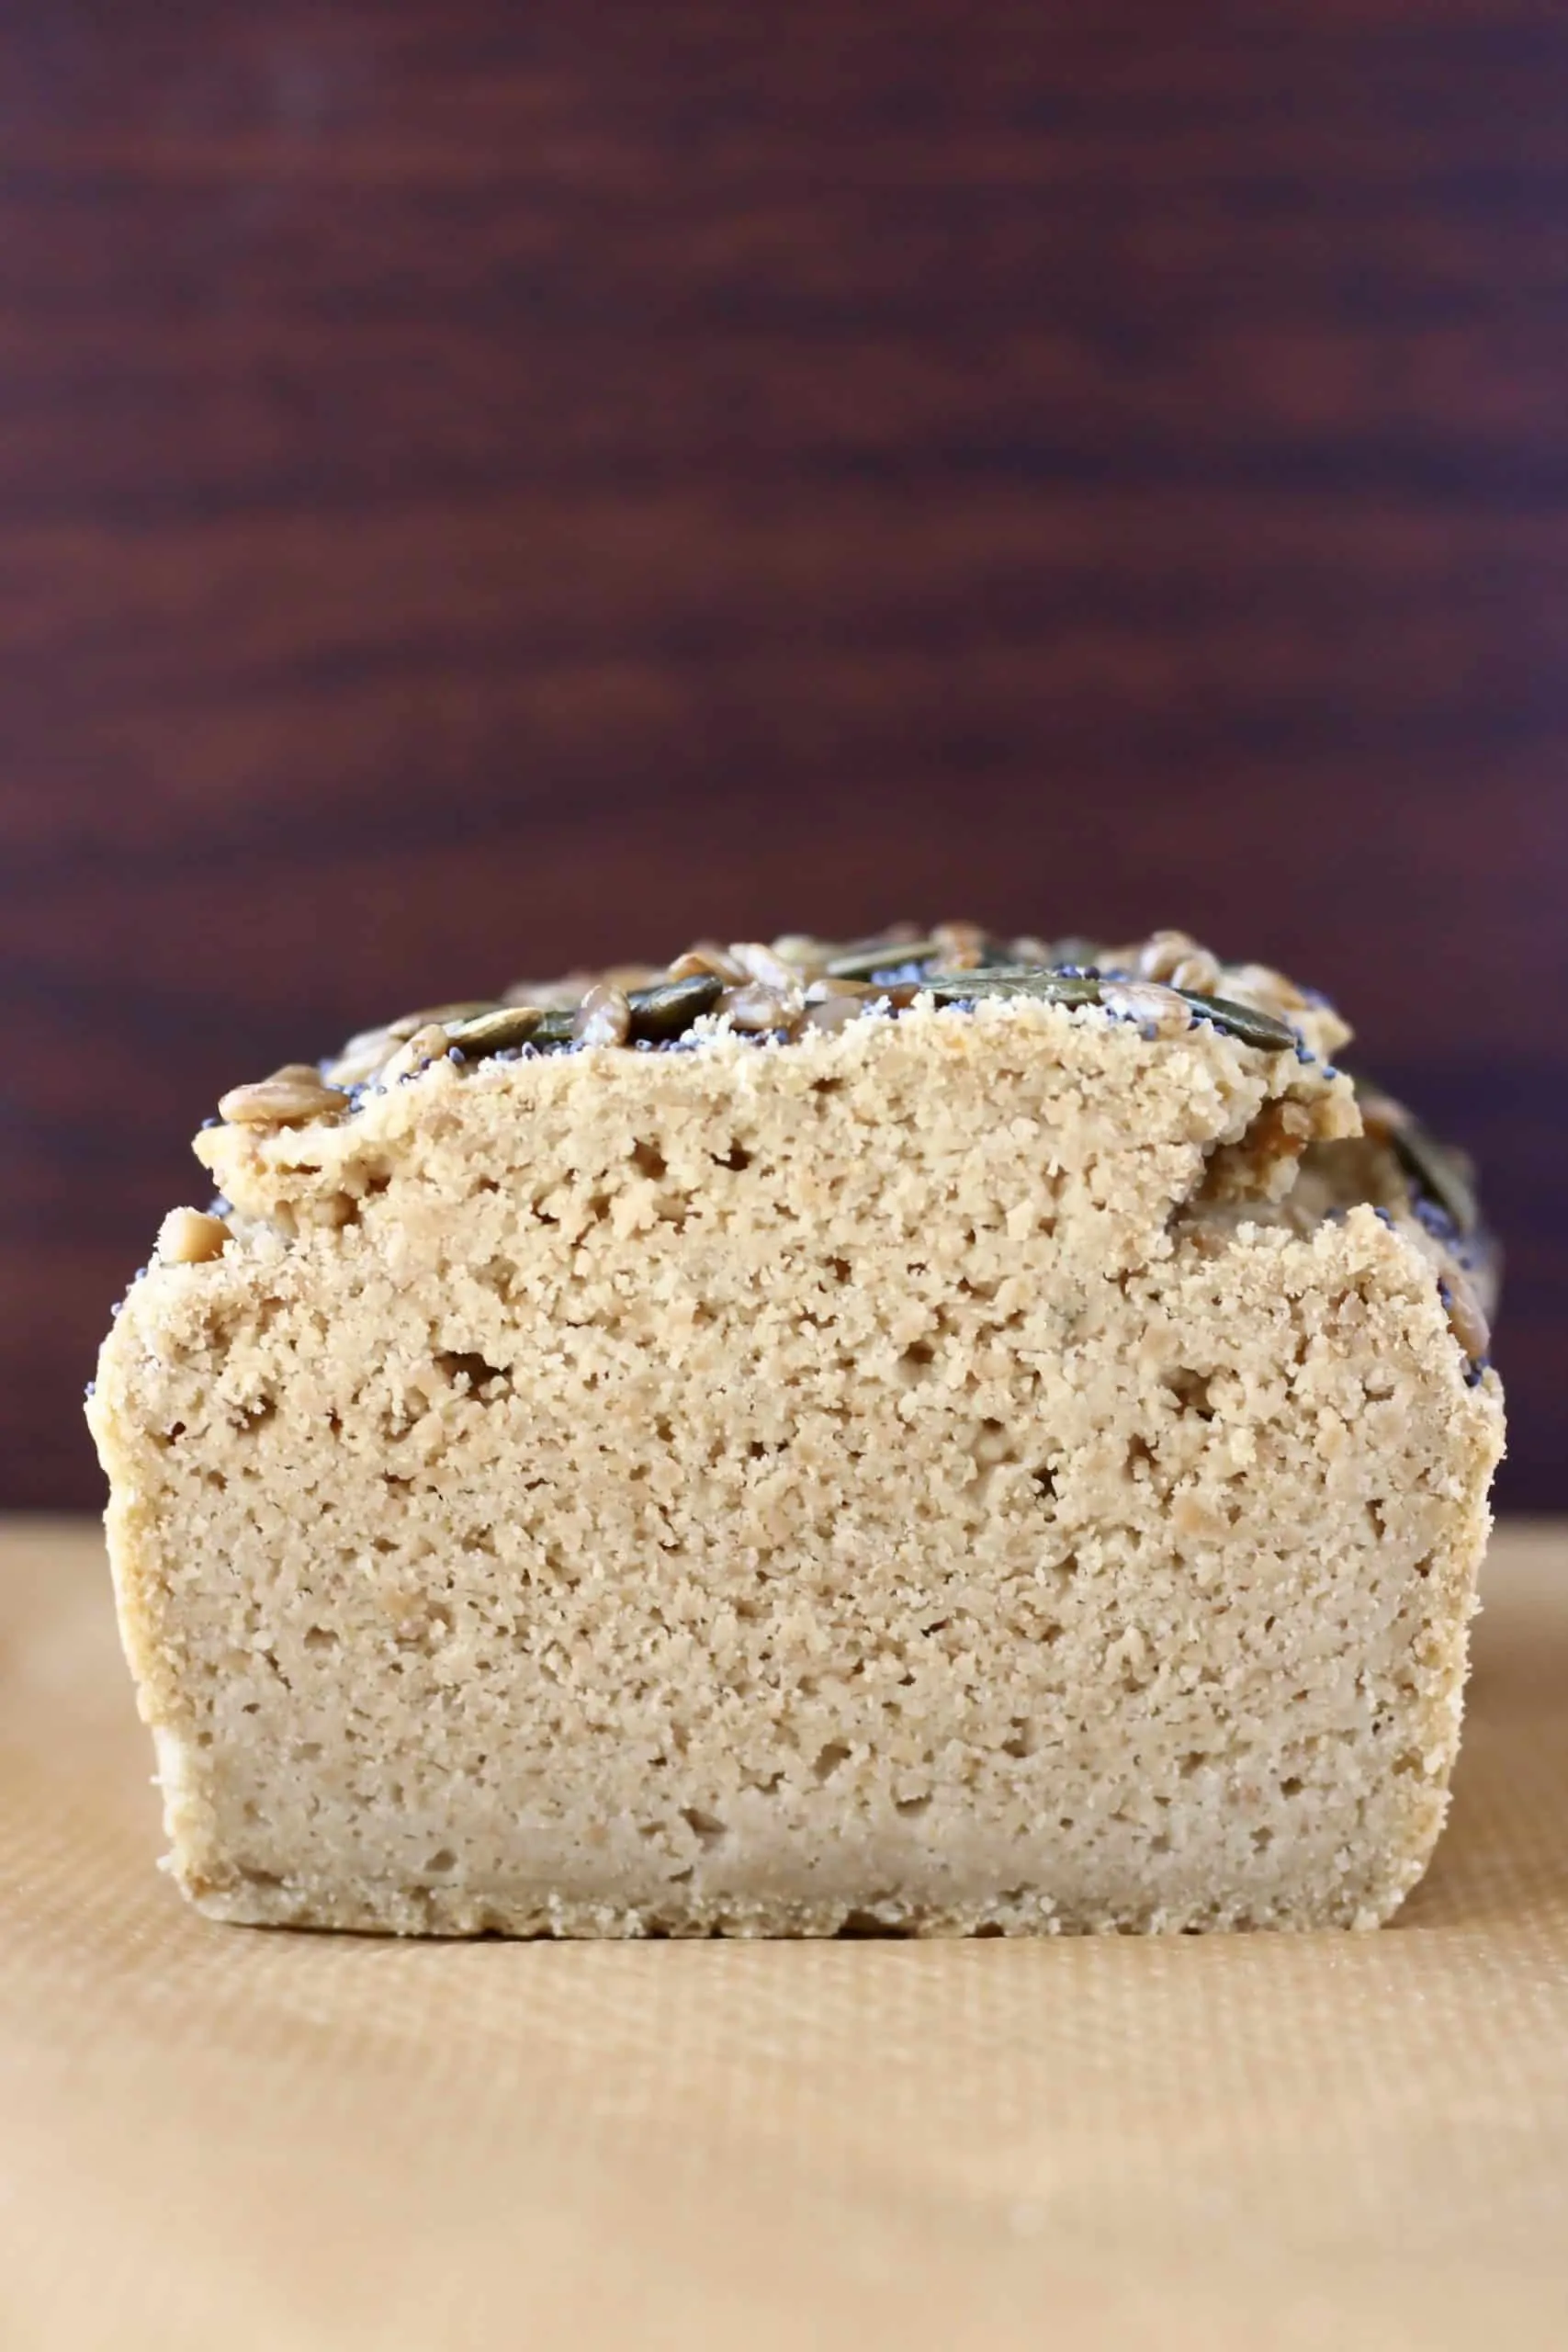 A sliced loaf of sunflower seed bread